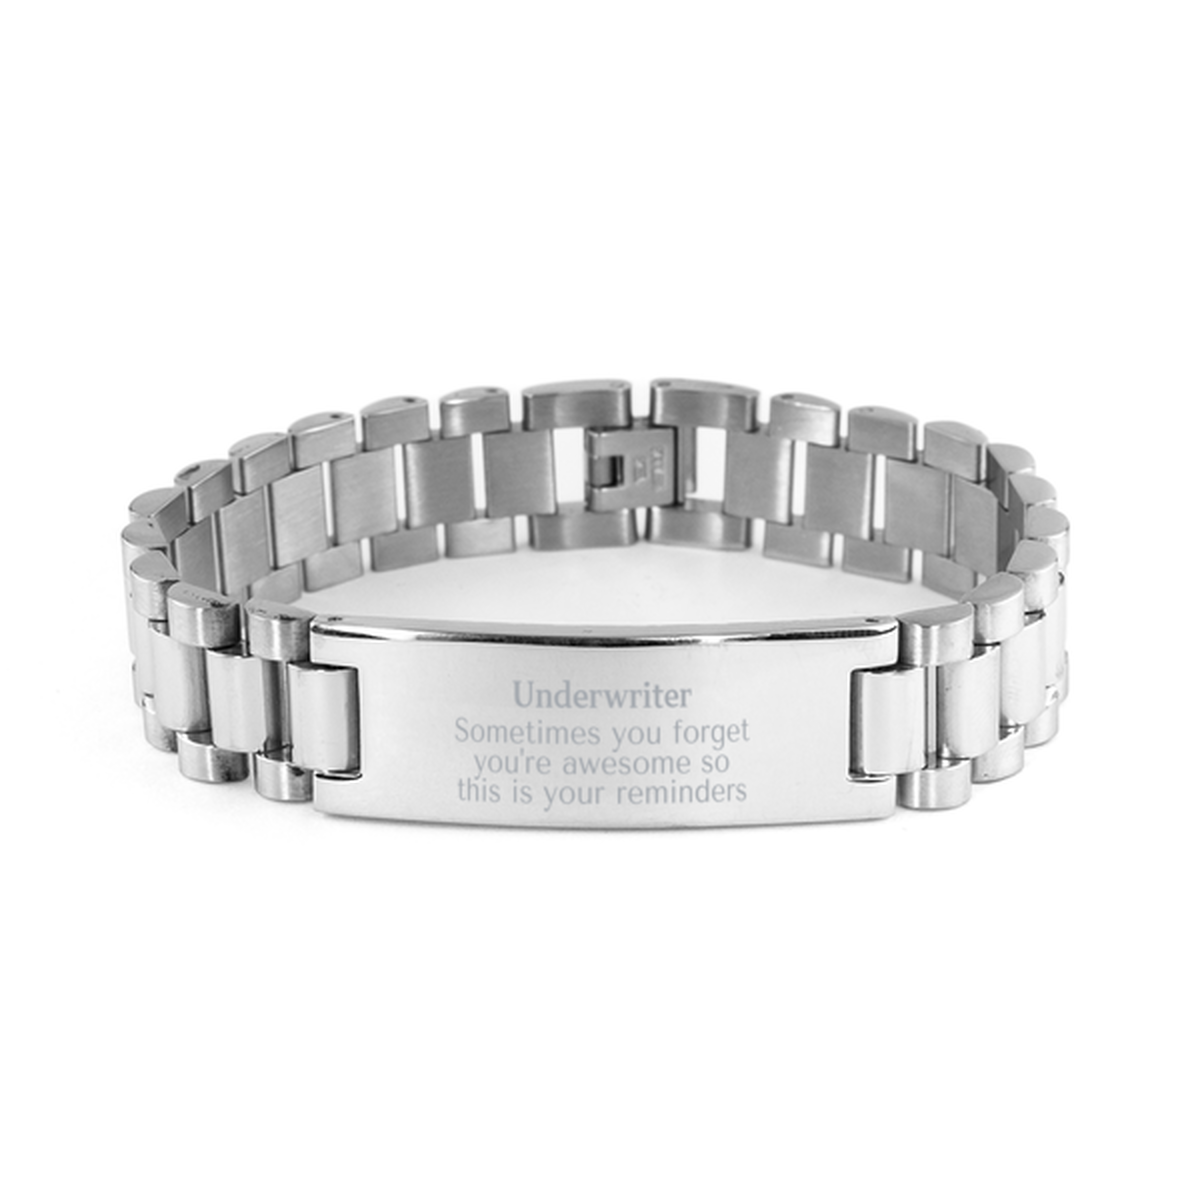 Sentimental Underwriter Ladder Stainless Steel Bracelet, Underwriter Sometimes you forget you're awesome so this is your reminders, Graduation Christmas Birthday Gifts for Underwriter, Men, Women, Coworkers